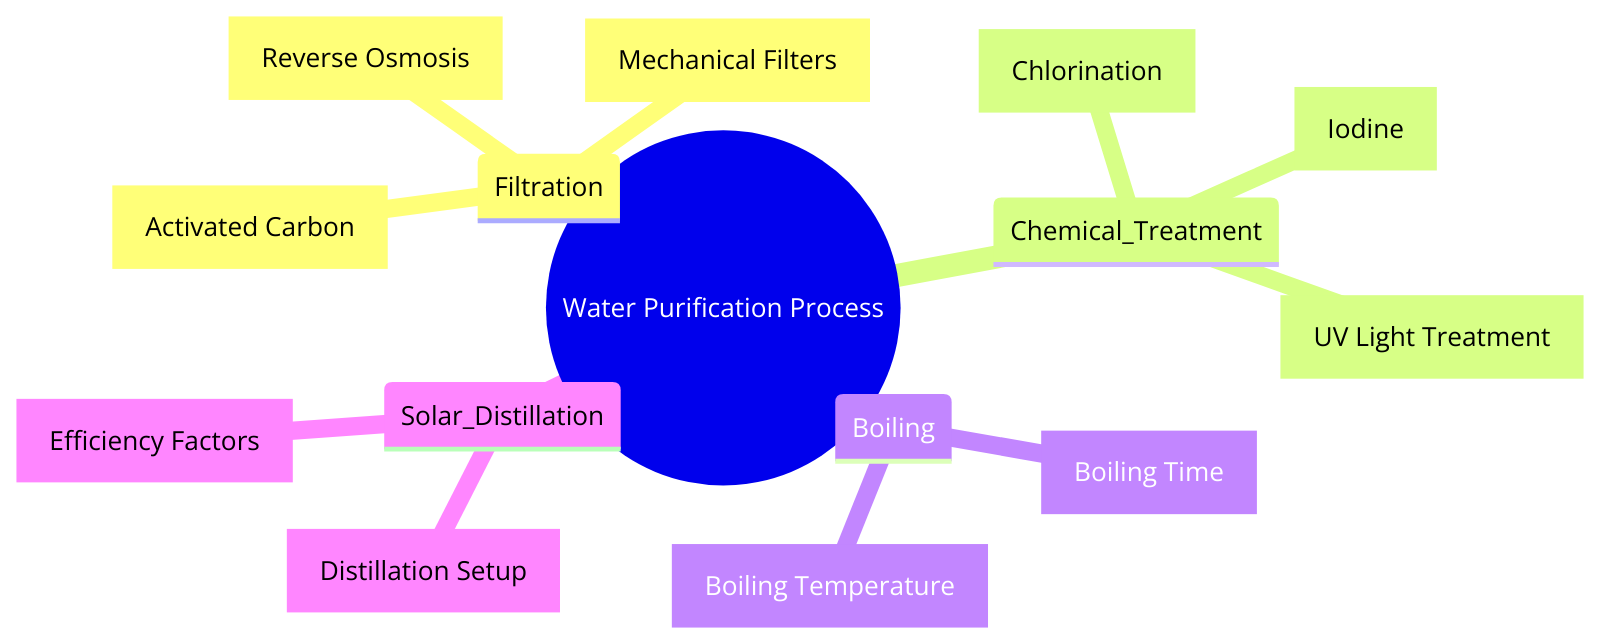 the process of water purification, including branches for filtration, chemical treatment, boiling, and solar distillation